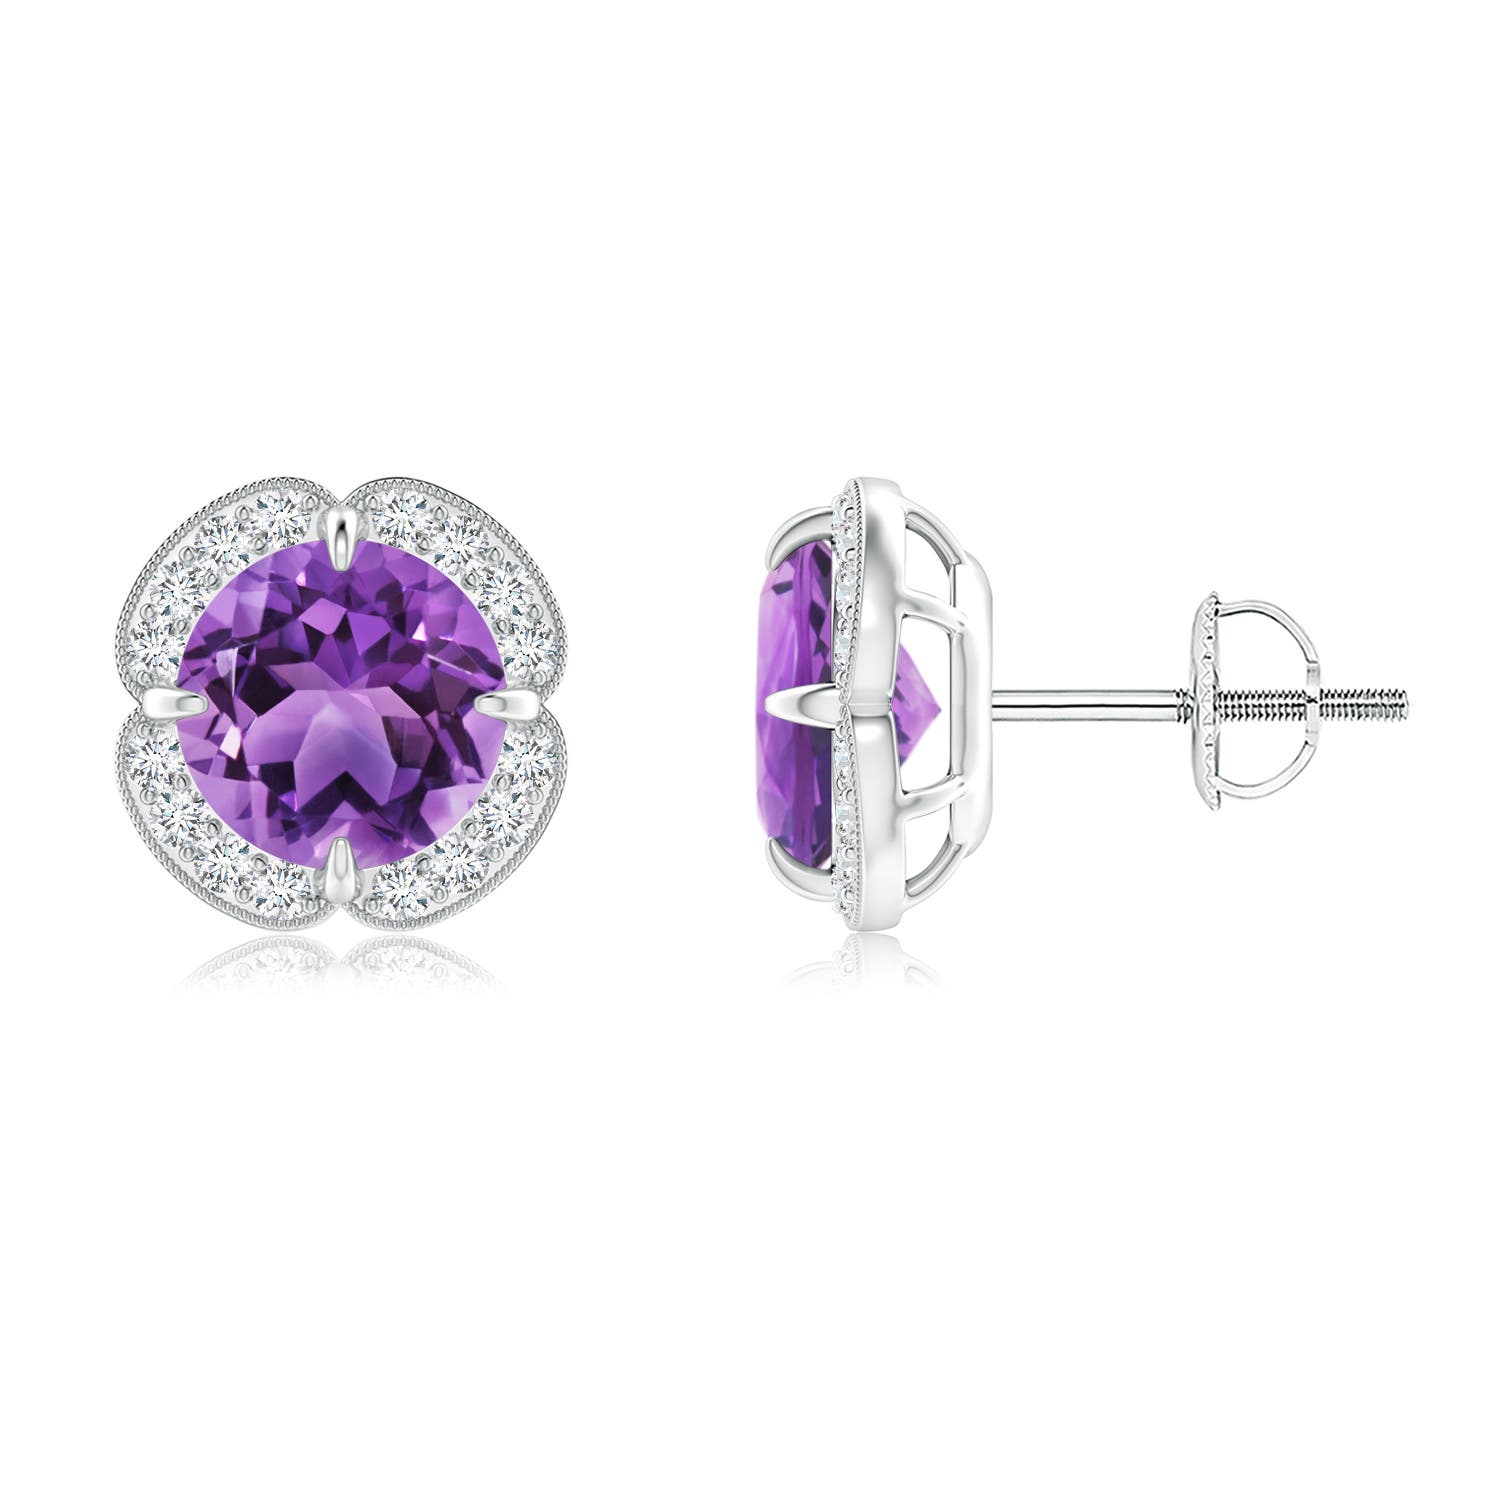 AA - Amethyst / 2.56 CT / 14 KT White Gold